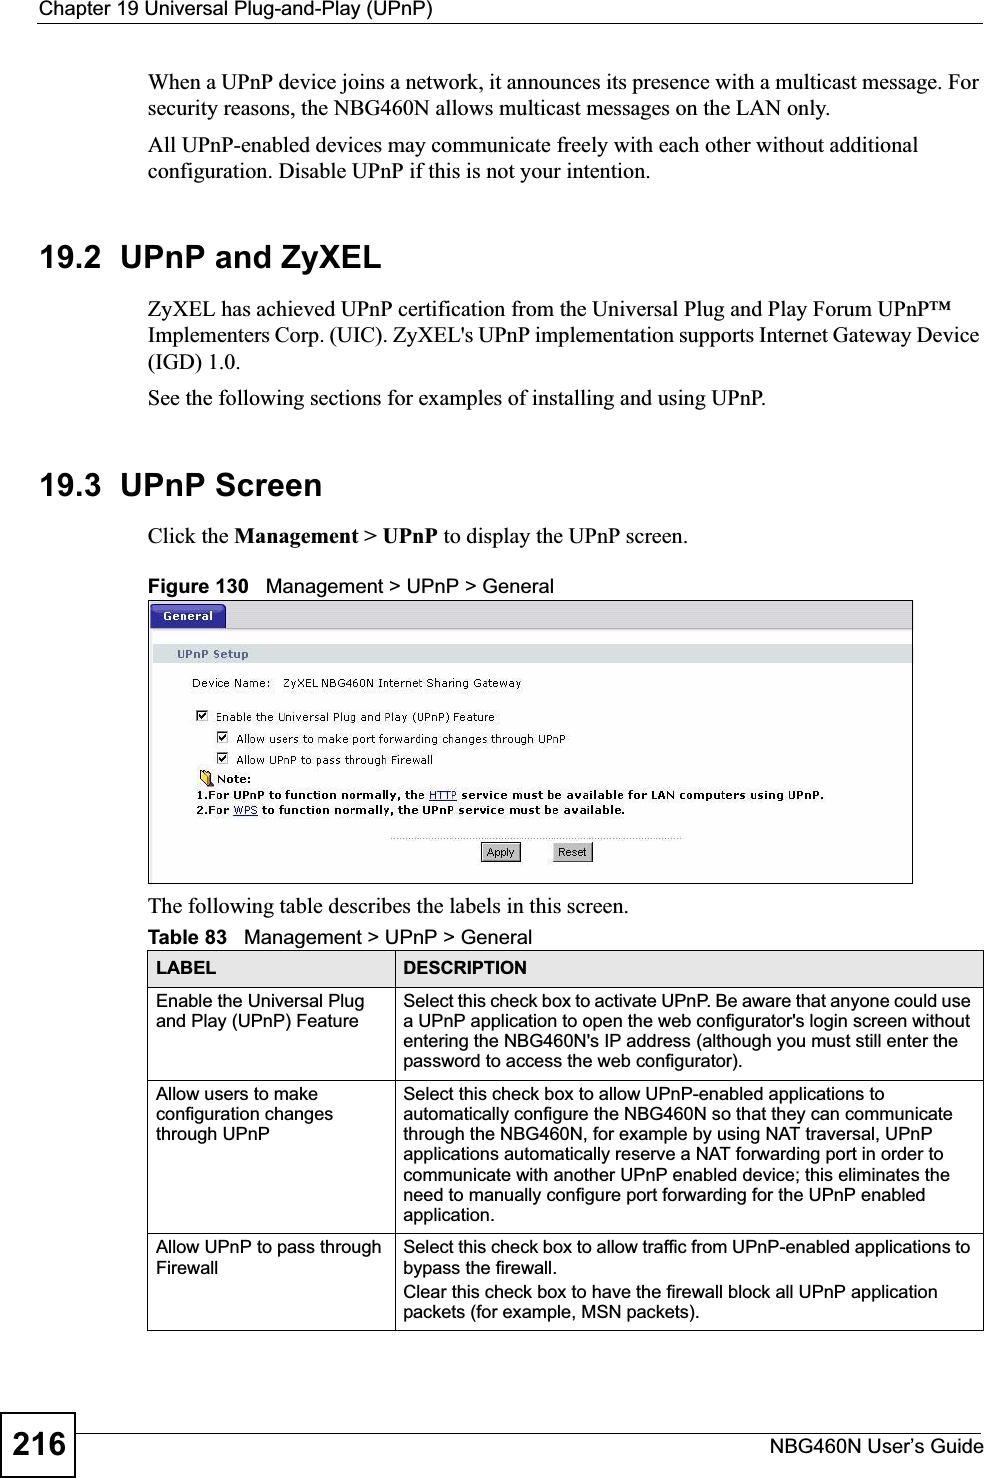 Chapter 19 Universal Plug-and-Play (UPnP)NBG460N User’s Guide216When a UPnP device joins a network, it announces its presence with a multicast message. For security reasons, the NBG460N allows multicast messages on the LAN only.All UPnP-enabled devices may communicate freely with each other without additional configuration. Disable UPnP if this is not your intention. 19.2  UPnP and ZyXELZyXEL has achieved UPnP certification from the Universal Plug and Play Forum UPnP™ Implementers Corp. (UIC). ZyXEL&apos;s UPnP implementation supports Internet Gateway Device (IGD) 1.0. See the following sections for examples of installing and using UPnP.19.3  UPnP ScreenClick the Management &gt; UPnP to display the UPnP screen.Figure 130   Management &gt; UPnP &gt; General The following table describes the labels in this screen. Table 83   Management &gt; UPnP &gt; GeneralLABEL DESCRIPTIONEnable the Universal Plug and Play (UPnP) FeatureSelect this check box to activate UPnP. Be aware that anyone could use a UPnP application to open the web configurator&apos;s login screen without entering the NBG460N&apos;s IP address (although you must still enter the password to access the web configurator).Allow users to make configuration changes through UPnPSelect this check box to allow UPnP-enabled applications to automatically configure the NBG460N so that they can communicate through the NBG460N, for example by using NAT traversal, UPnP applications automatically reserve a NAT forwarding port in order to communicate with another UPnP enabled device; this eliminates the need to manually configure port forwarding for the UPnP enabled application. Allow UPnP to pass through FirewallSelect this check box to allow traffic from UPnP-enabled applications to bypass the firewall. Clear this check box to have the firewall block all UPnP application packets (for example, MSN packets).